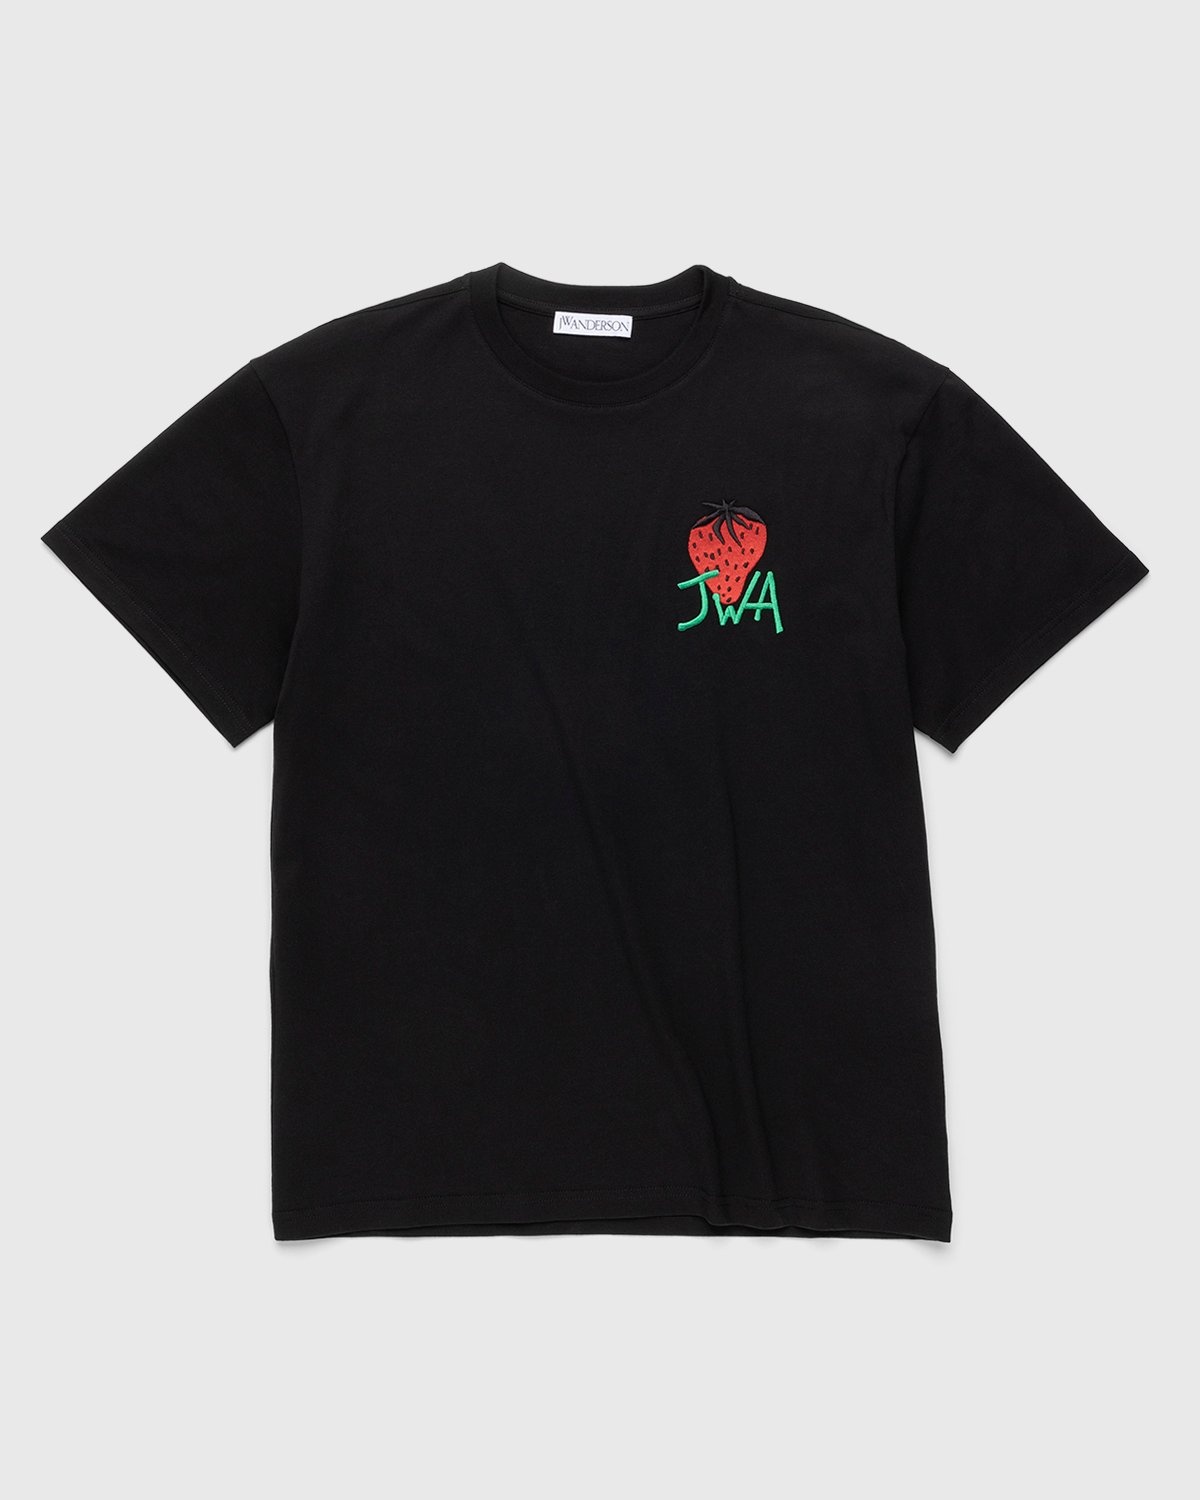 J.W. Anderson – Embroidered Strawberry JWA T-Shirt Black - Tops - Black - Image 1